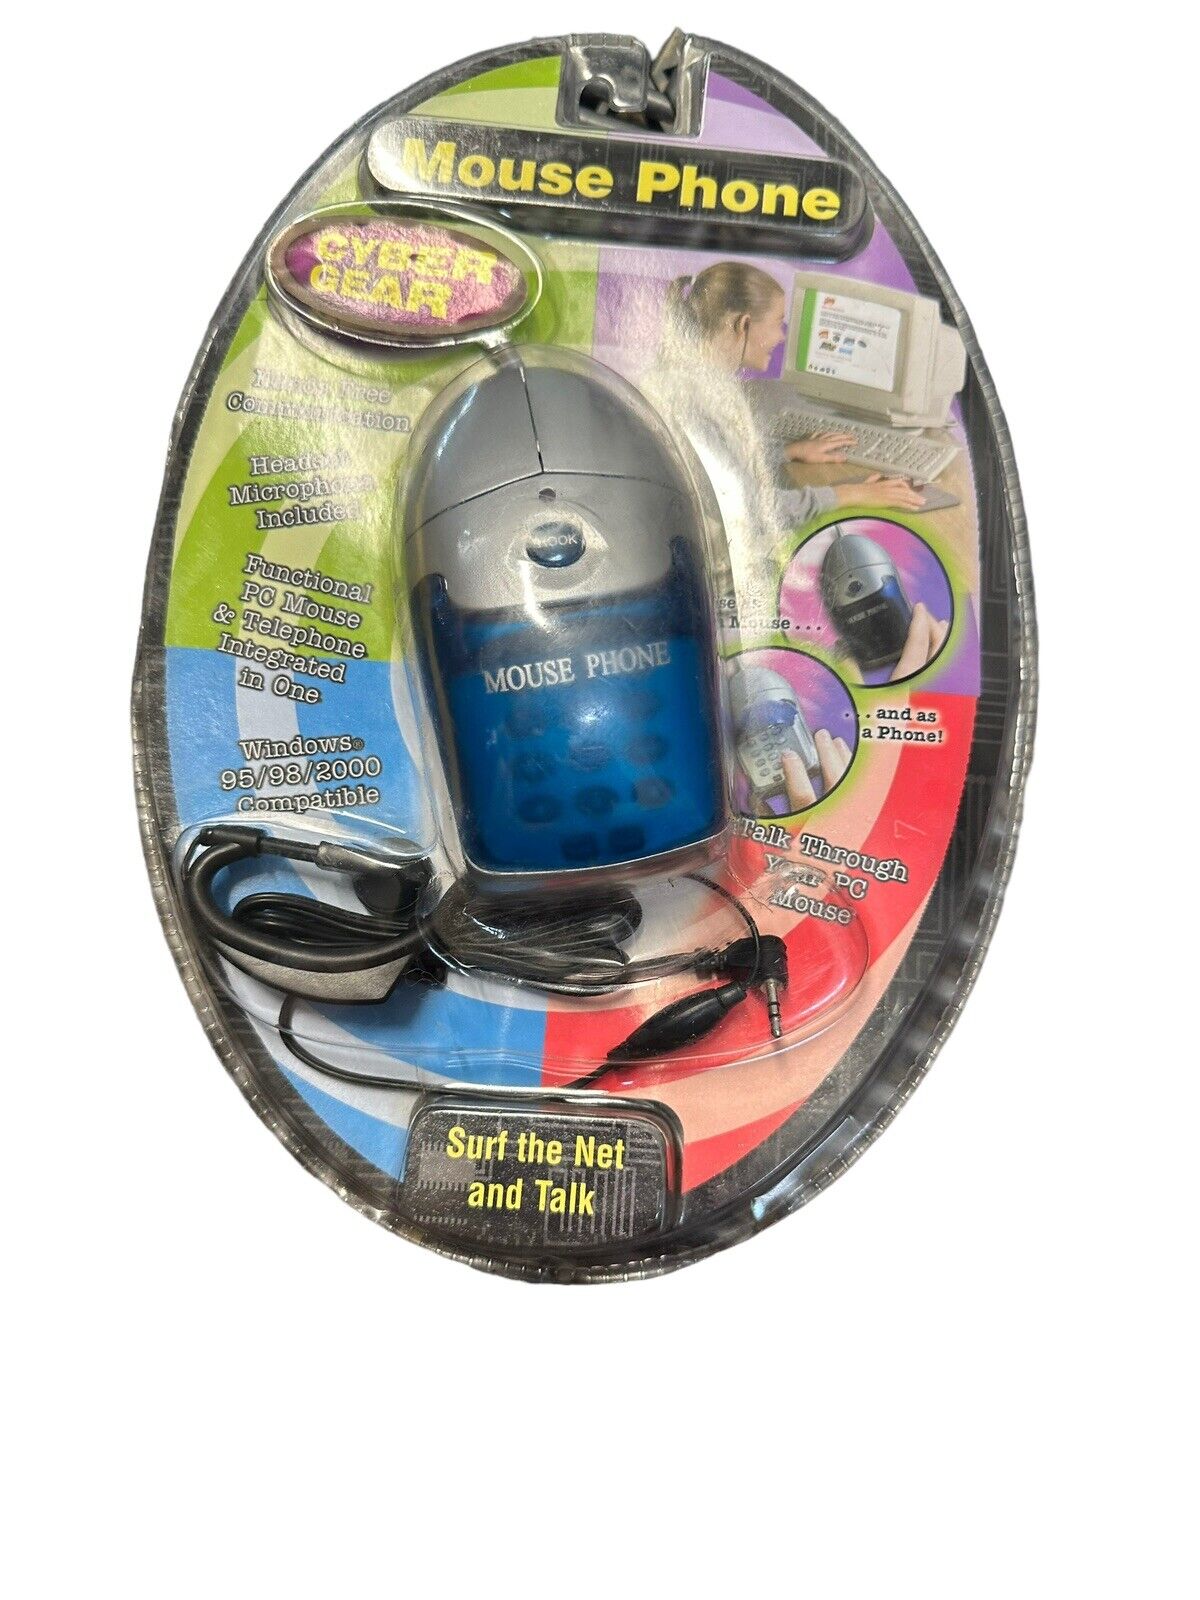 NEW Vintage Cyber Gear Mouse Phone Old Stock PS2 Connector Blue Surf Net & Talk